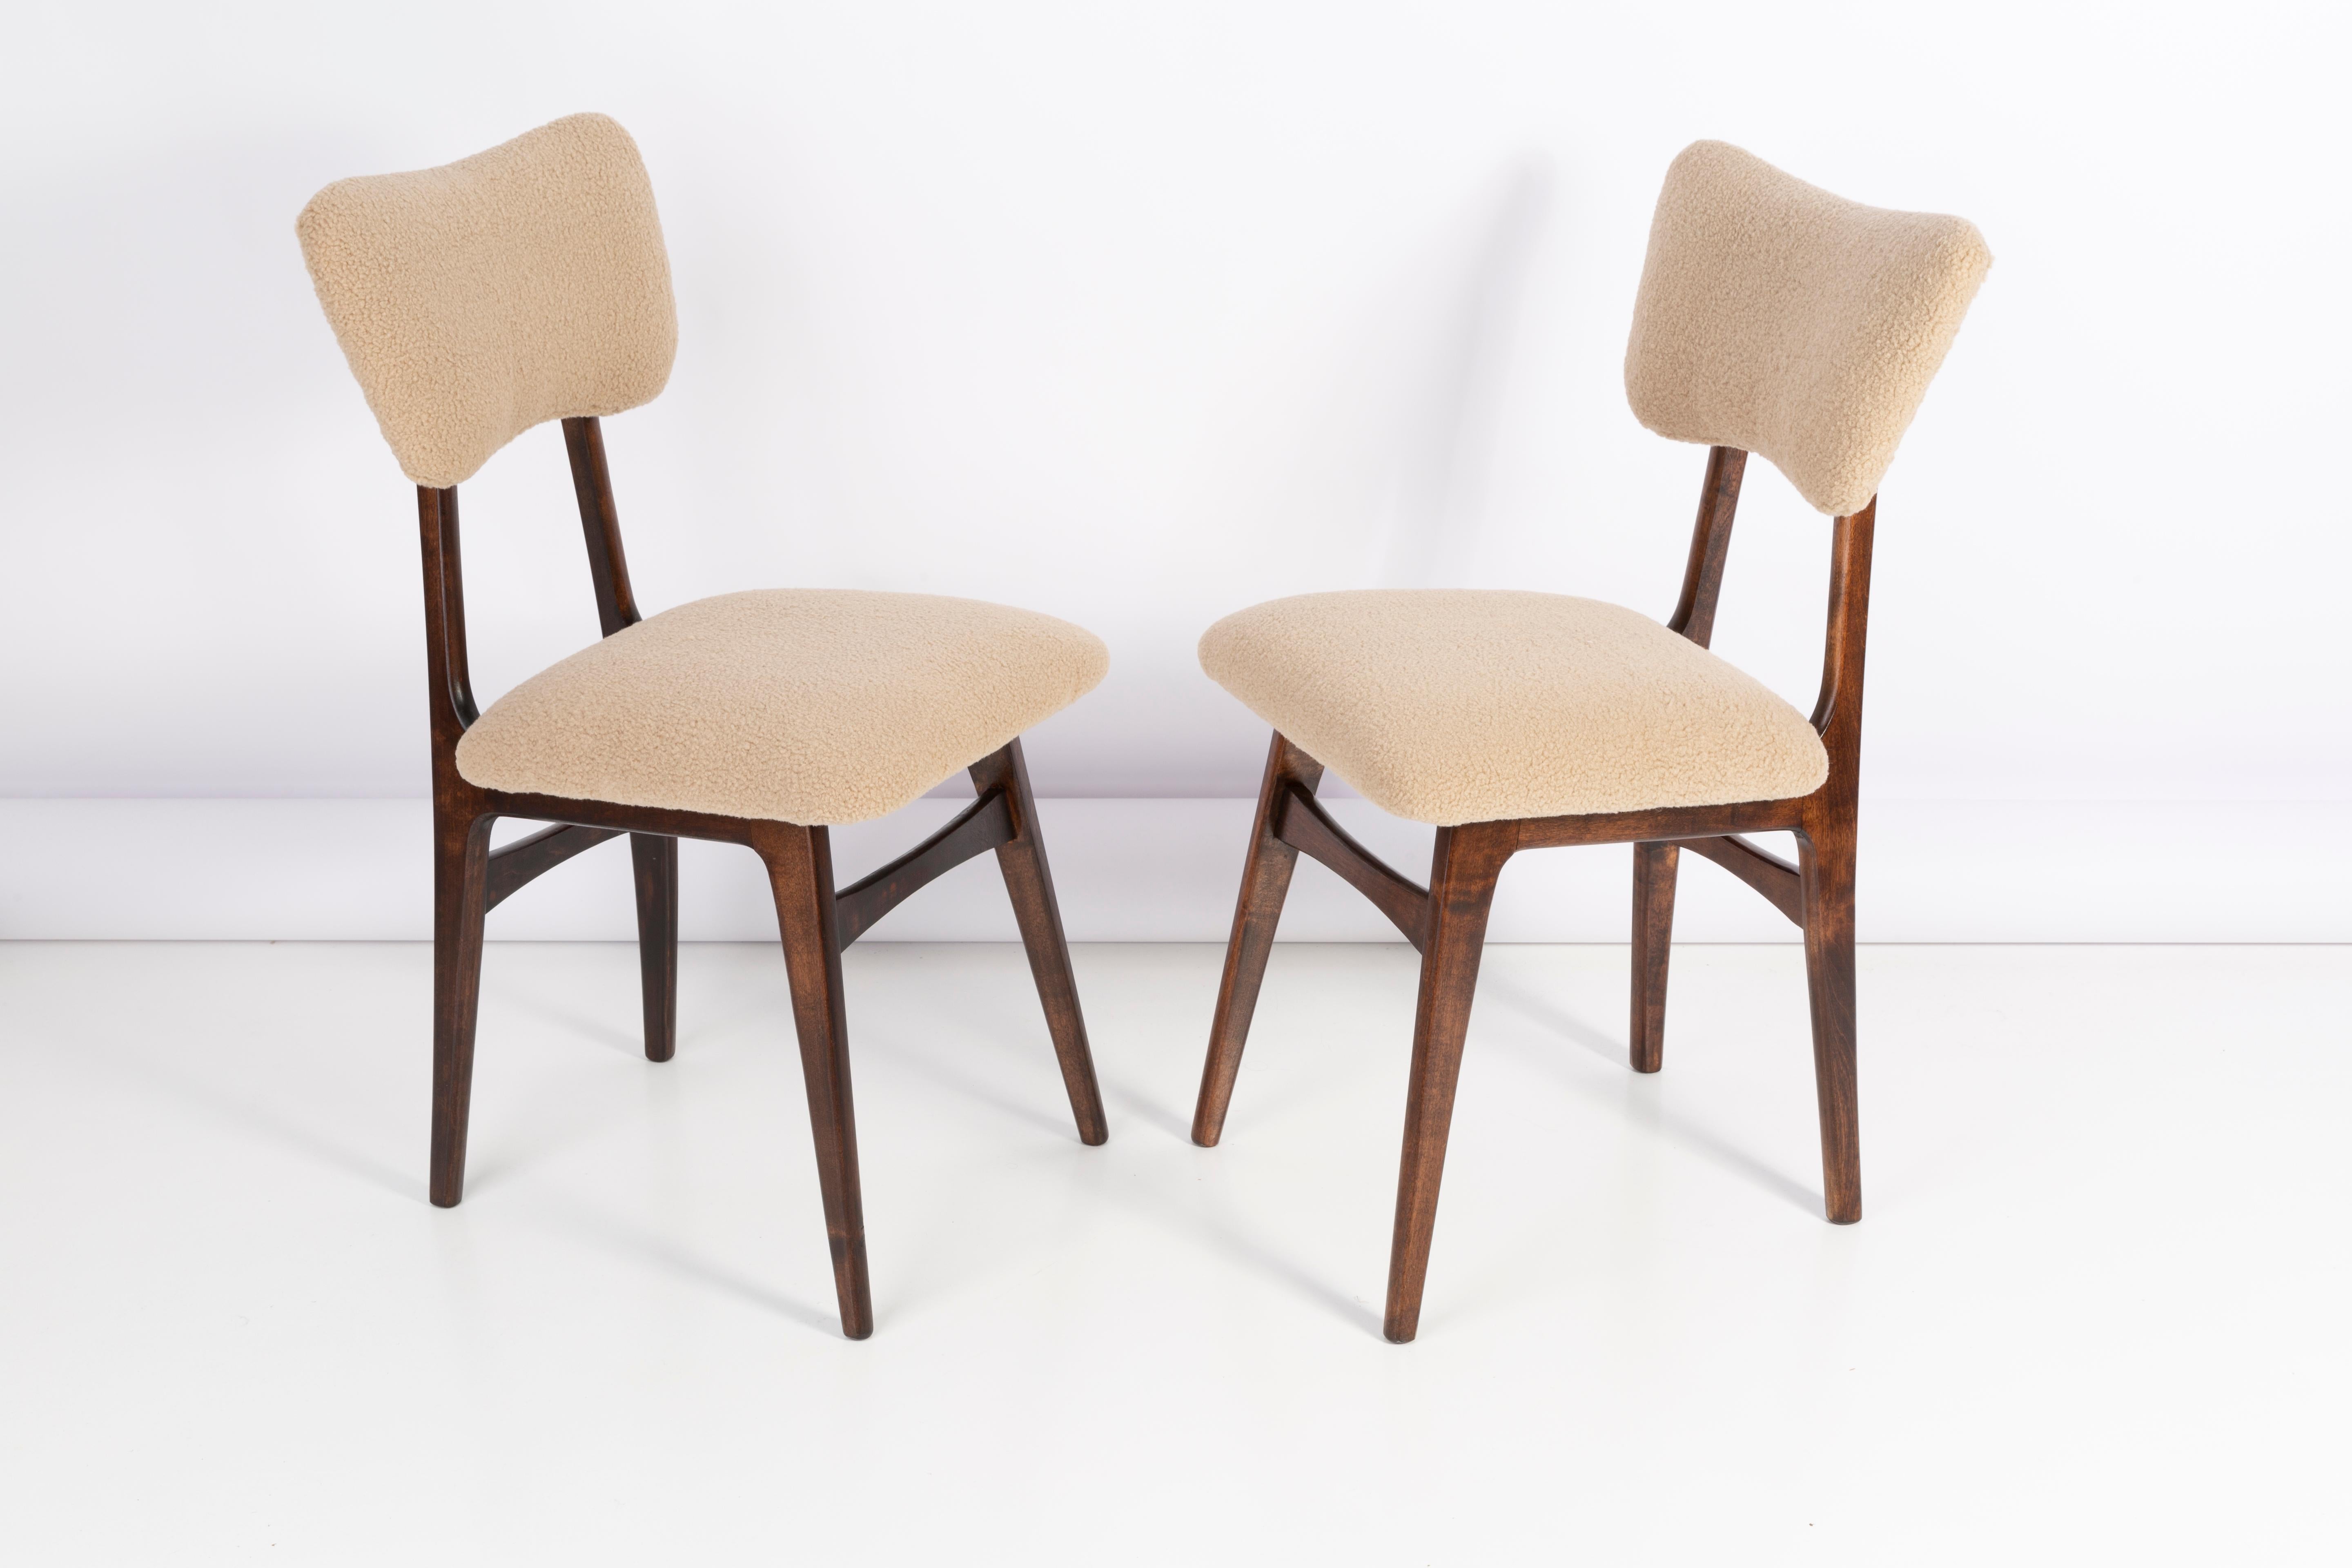 Chairs designed by Prof. Rajmund Halas. Made of beechwood. Chairs are after a complete upholstery renovation; the woodwork has been refreshed. Seat and back is dressed in camel, durable and pleasant to the touch bouclé fabric. Chairs are stabile and